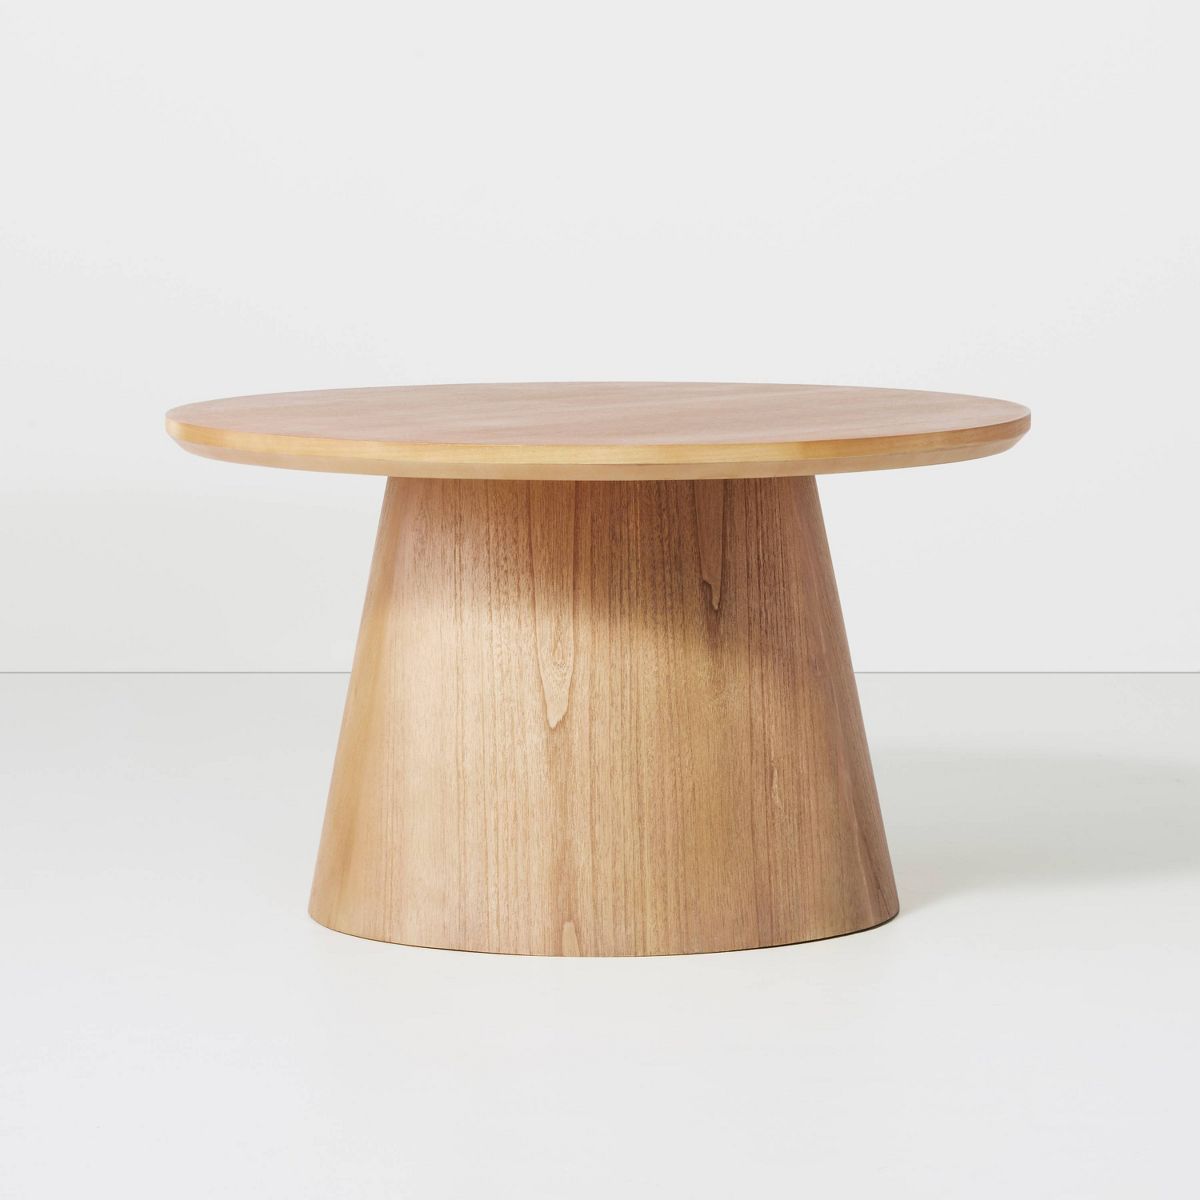 Wooden Round Pedestal Coffee Table - Hearth & Hand™ with Magnolia | Target